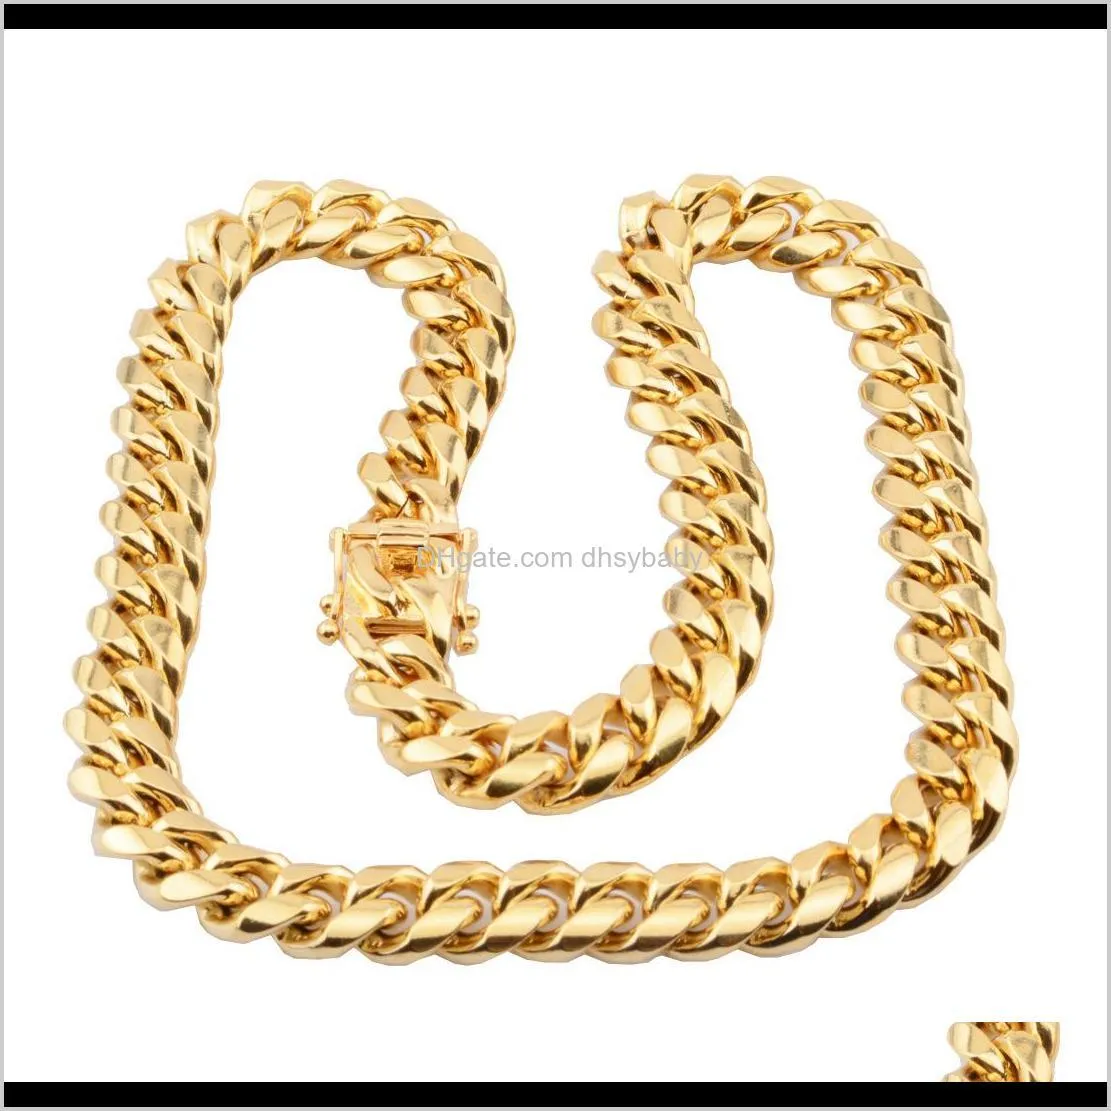 luxury designer mens necklace gold chain stainless steel jewelry hip hop cuban link rapper accessories fashion jewellery